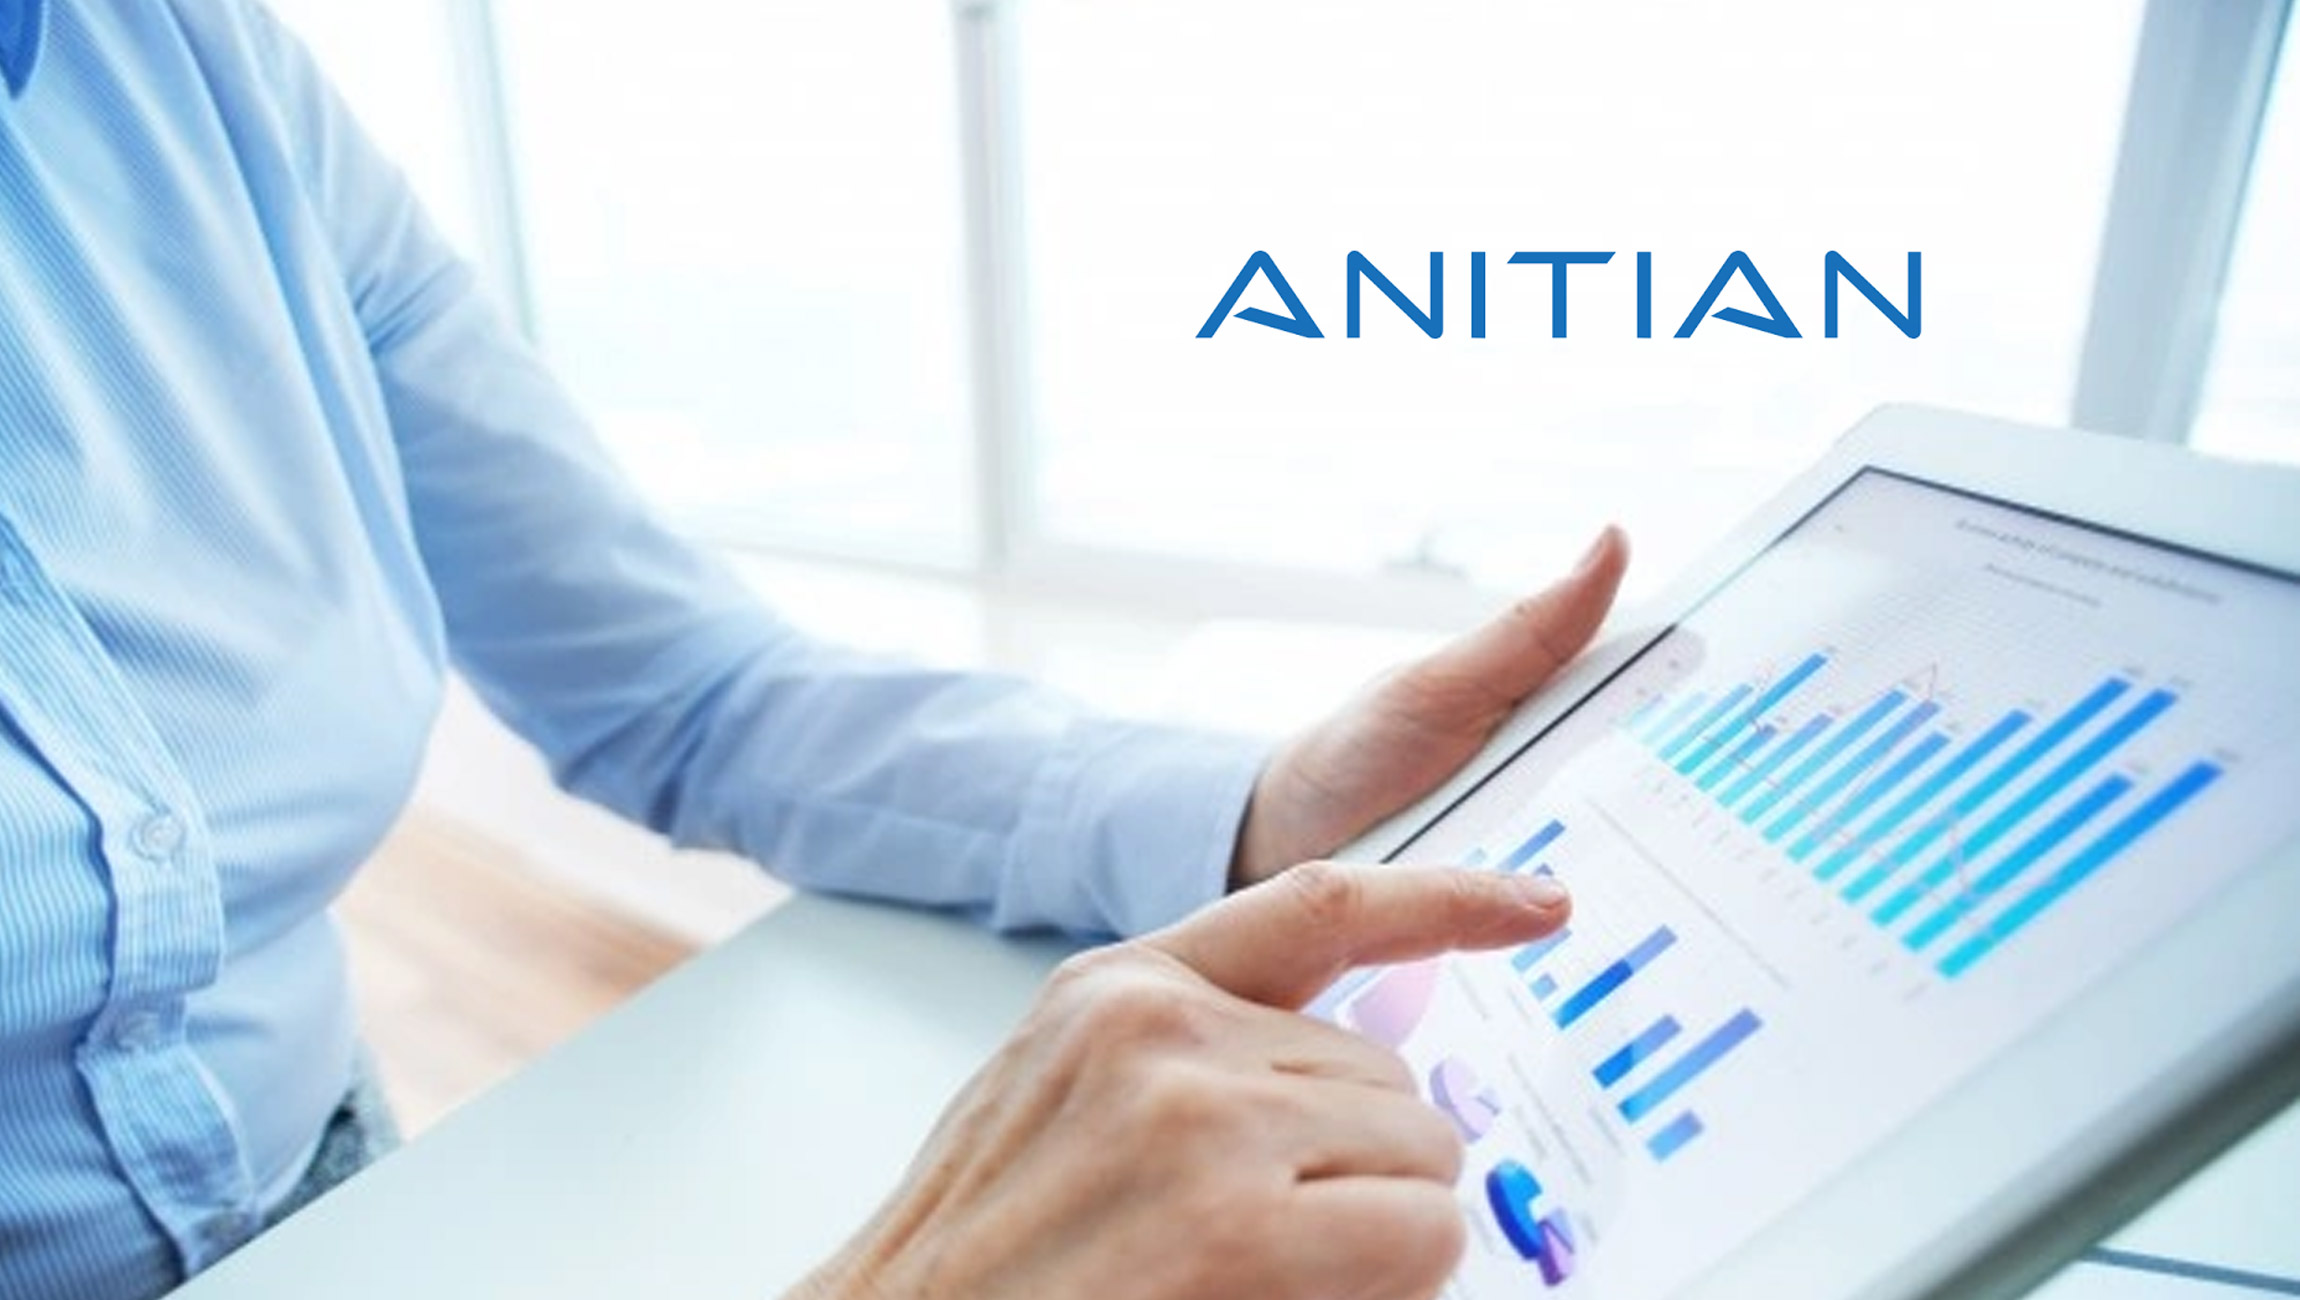 Anitian Announces New Accelerate Partner Program to Empower Enterprises to Get Their Applications to the Cloud and Market Quickly and Securely